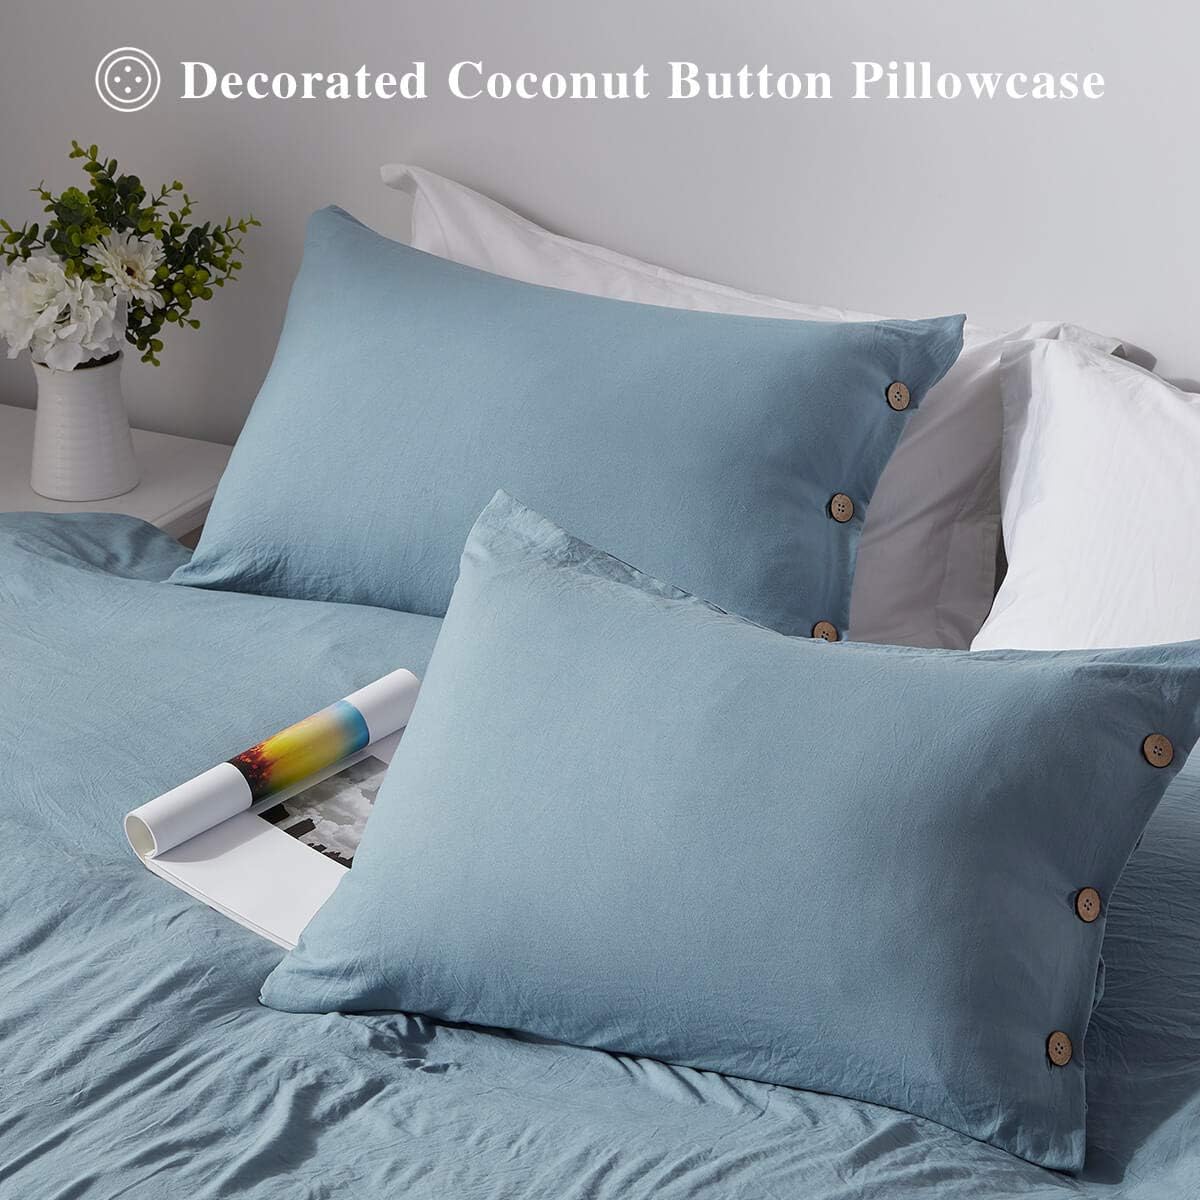 King Size Duvet Cover Set with Buttons Closure Blue Grey, 3 Pieces Solid Color Ultra Soft Skin-Friendly Comforter Cover Set (1 Duvet Cover +2 Pillowcases)